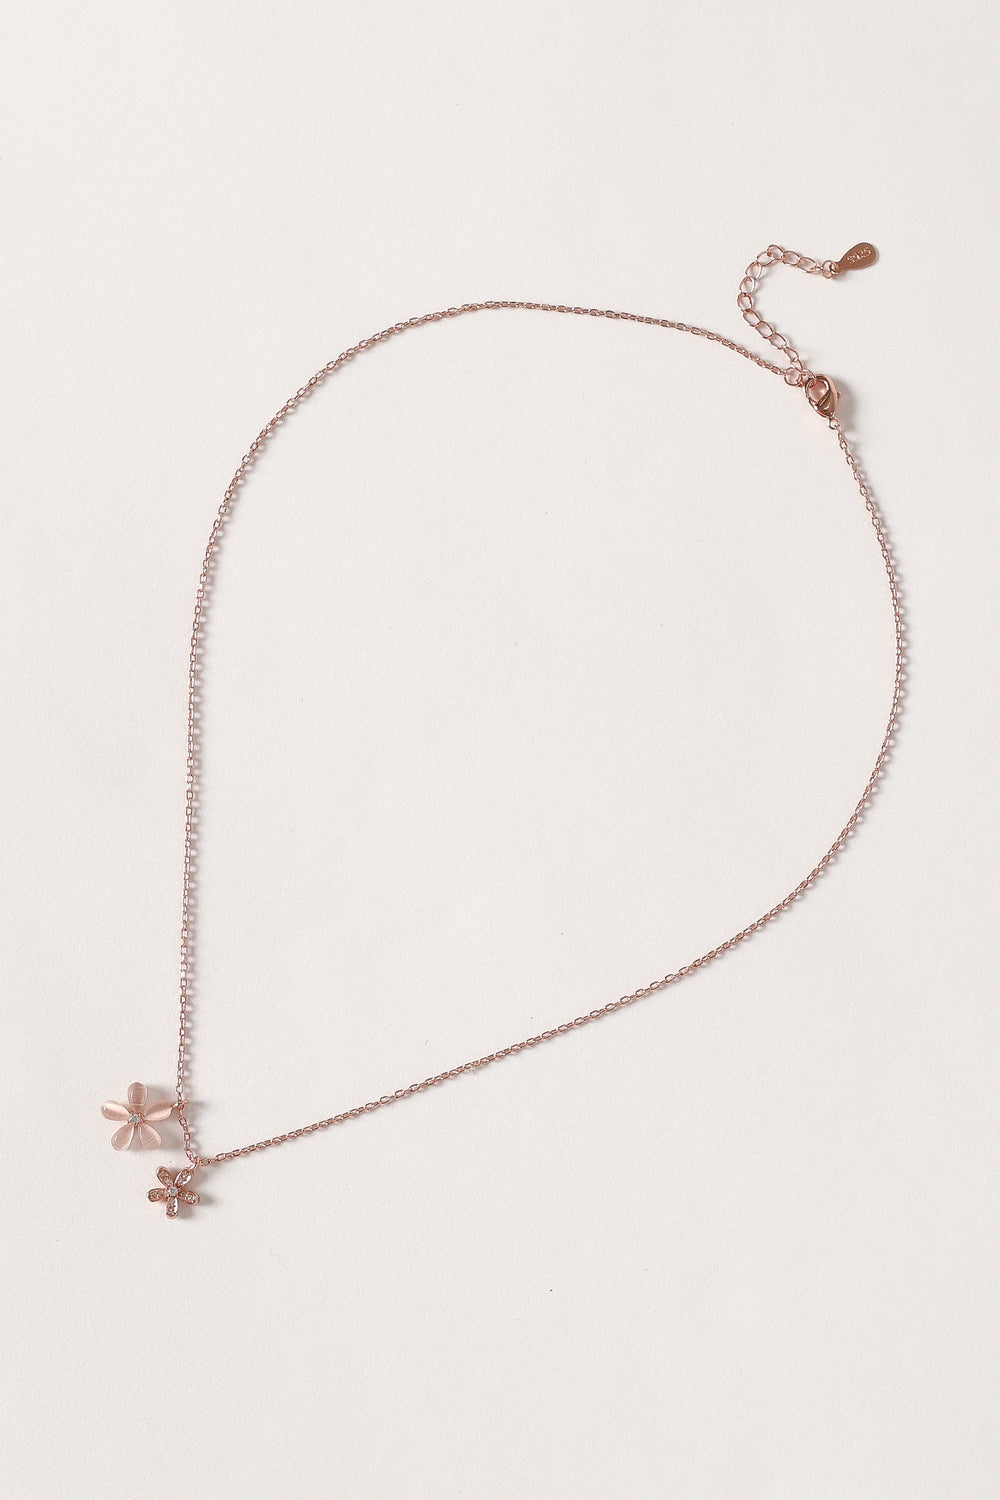 Petal and Pup USA ACCESSORIES Hana Floral Necklace - Gold One Size